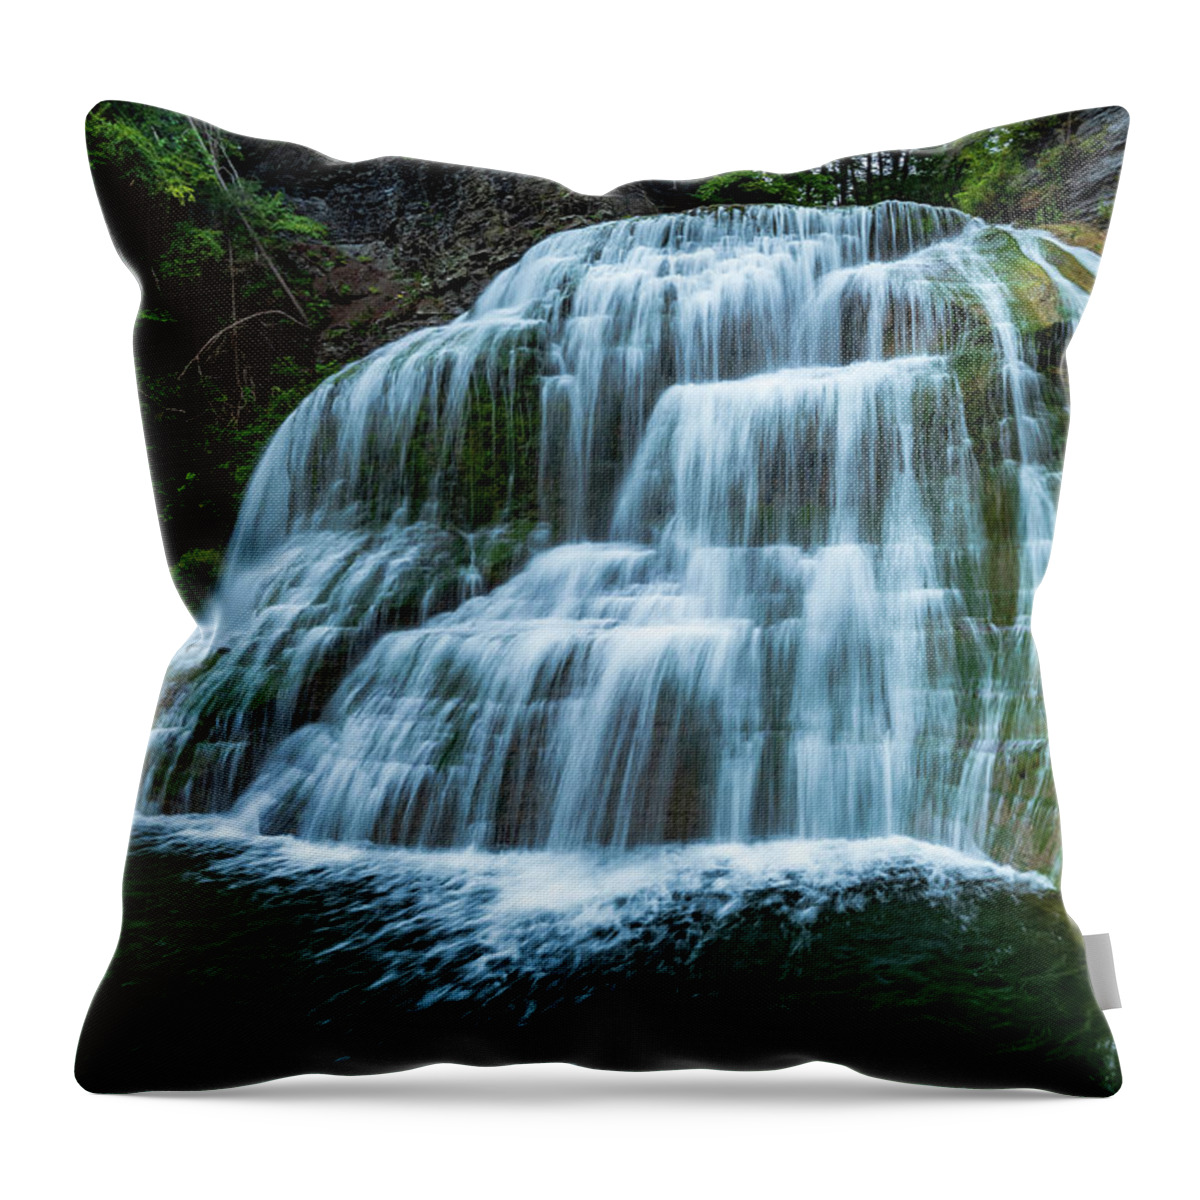 2018 Throw Pillow featuring the photograph Lower Fals #2 by Stef Ko